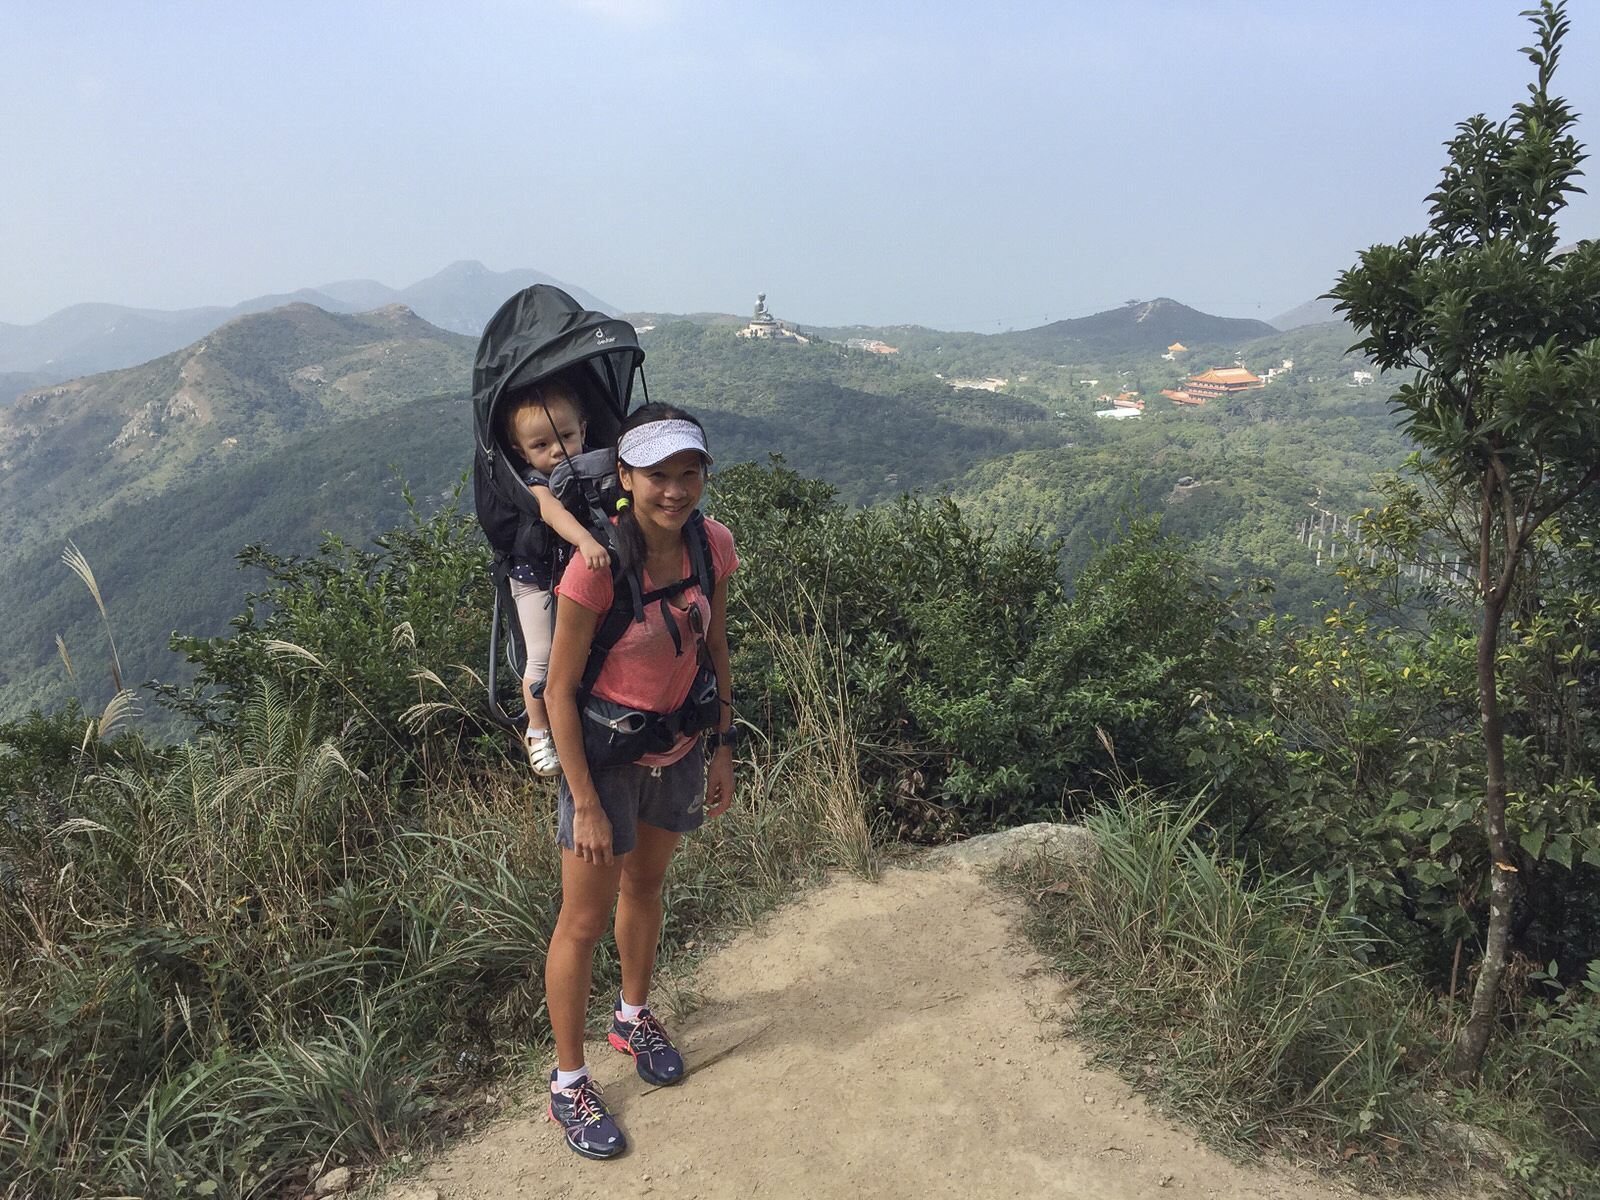 This handout image shows writer Jeanette Wang, daughter Marla and her Deuter Kid Comfort III child carrying rucksack on Lantau Island. 26AUG15 [fitness]